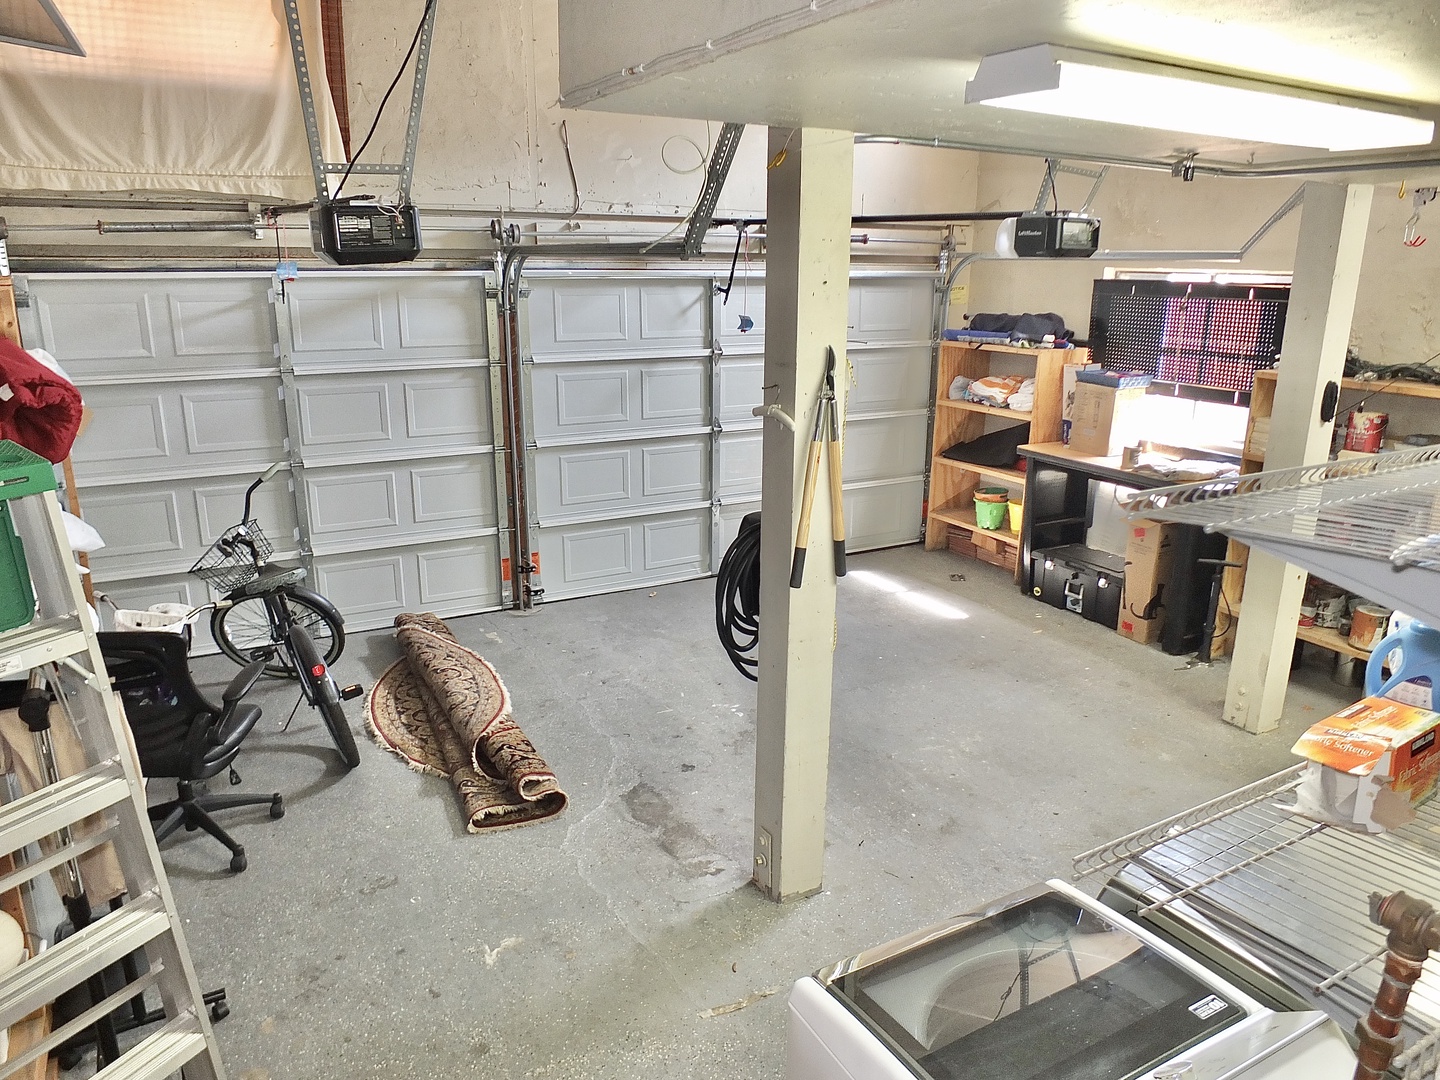 This home offers parking for up to 2 vehicles, with 1 space available in the garage